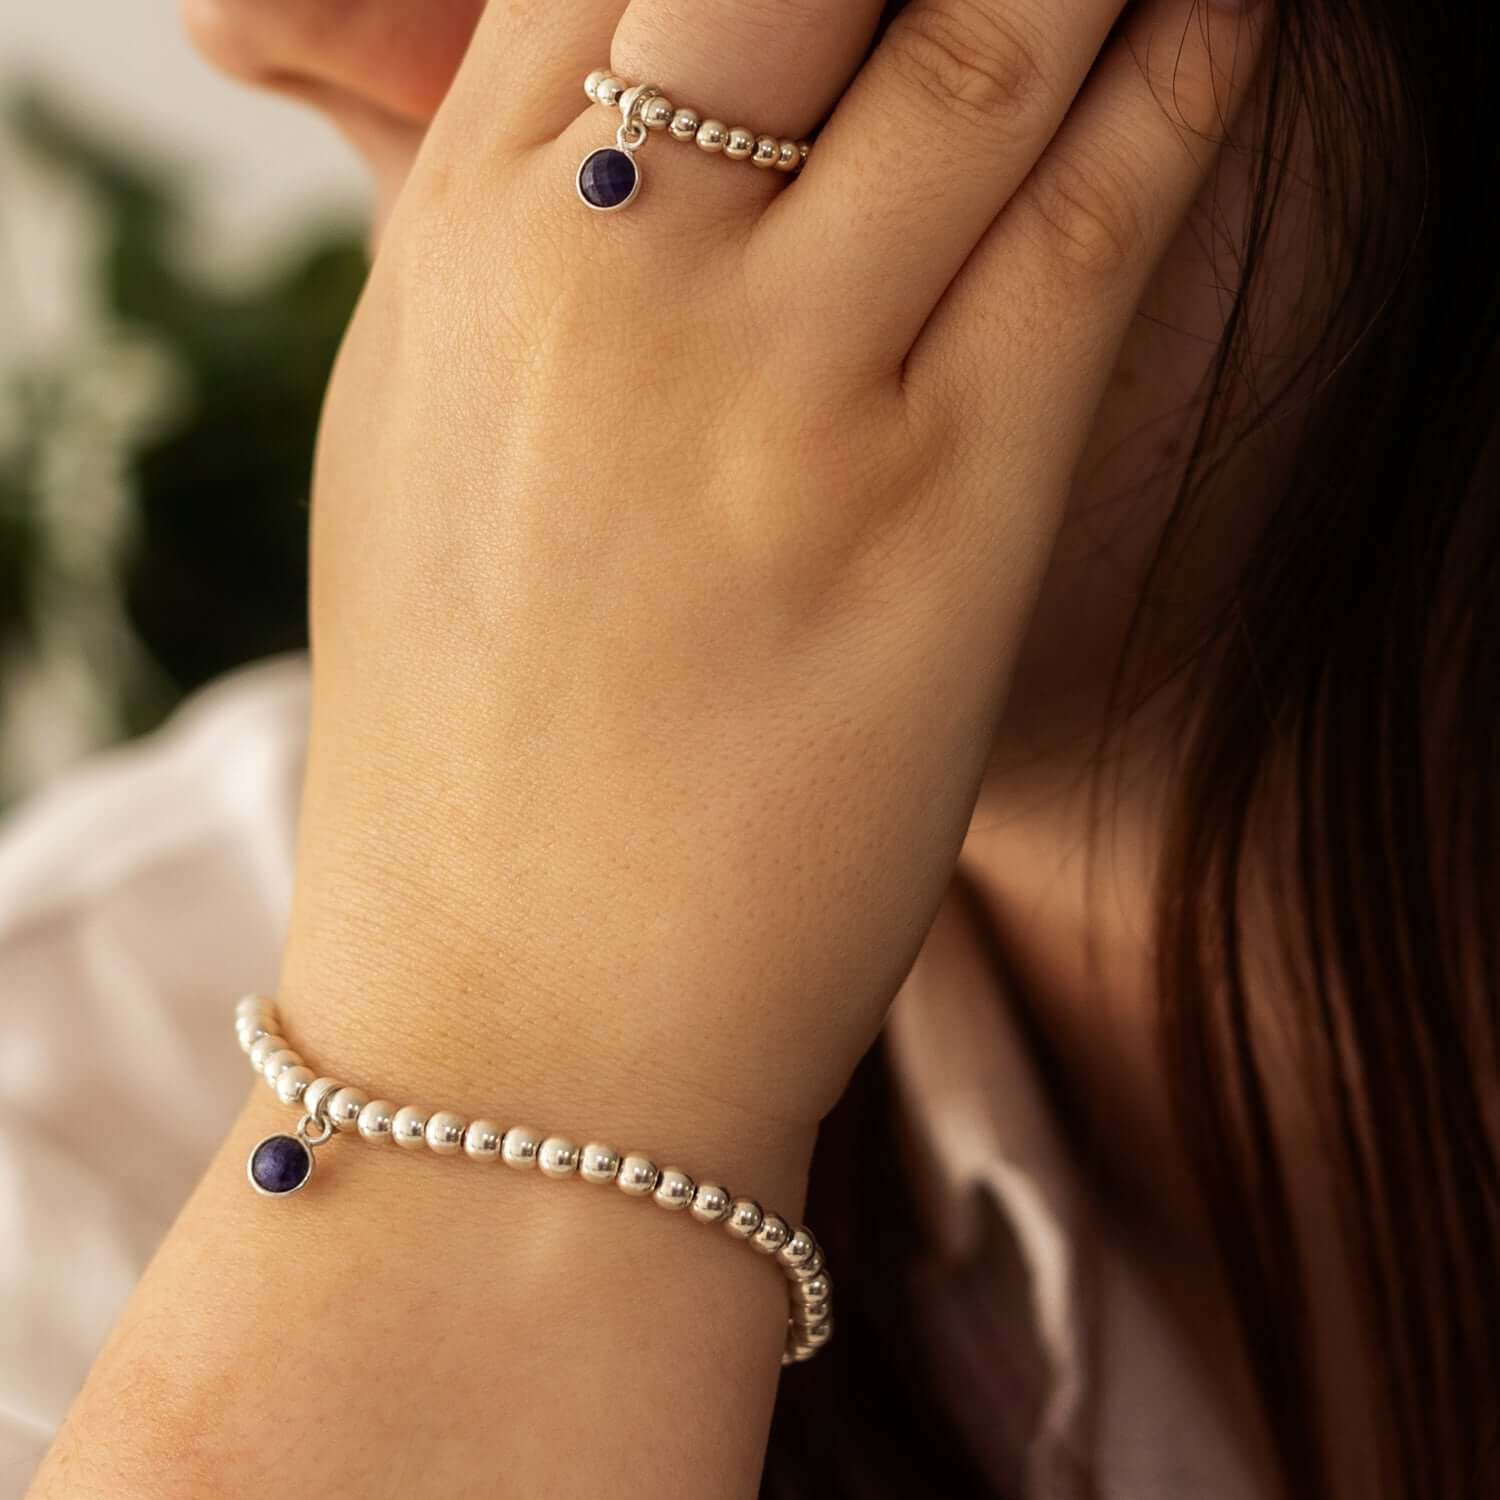 A person wearing a pearl bracelet and matching ring with small purple gemstone charms, reminiscent of September birthstone jewellery, holds their hand to their face. The background is blurred, with hints of greenery